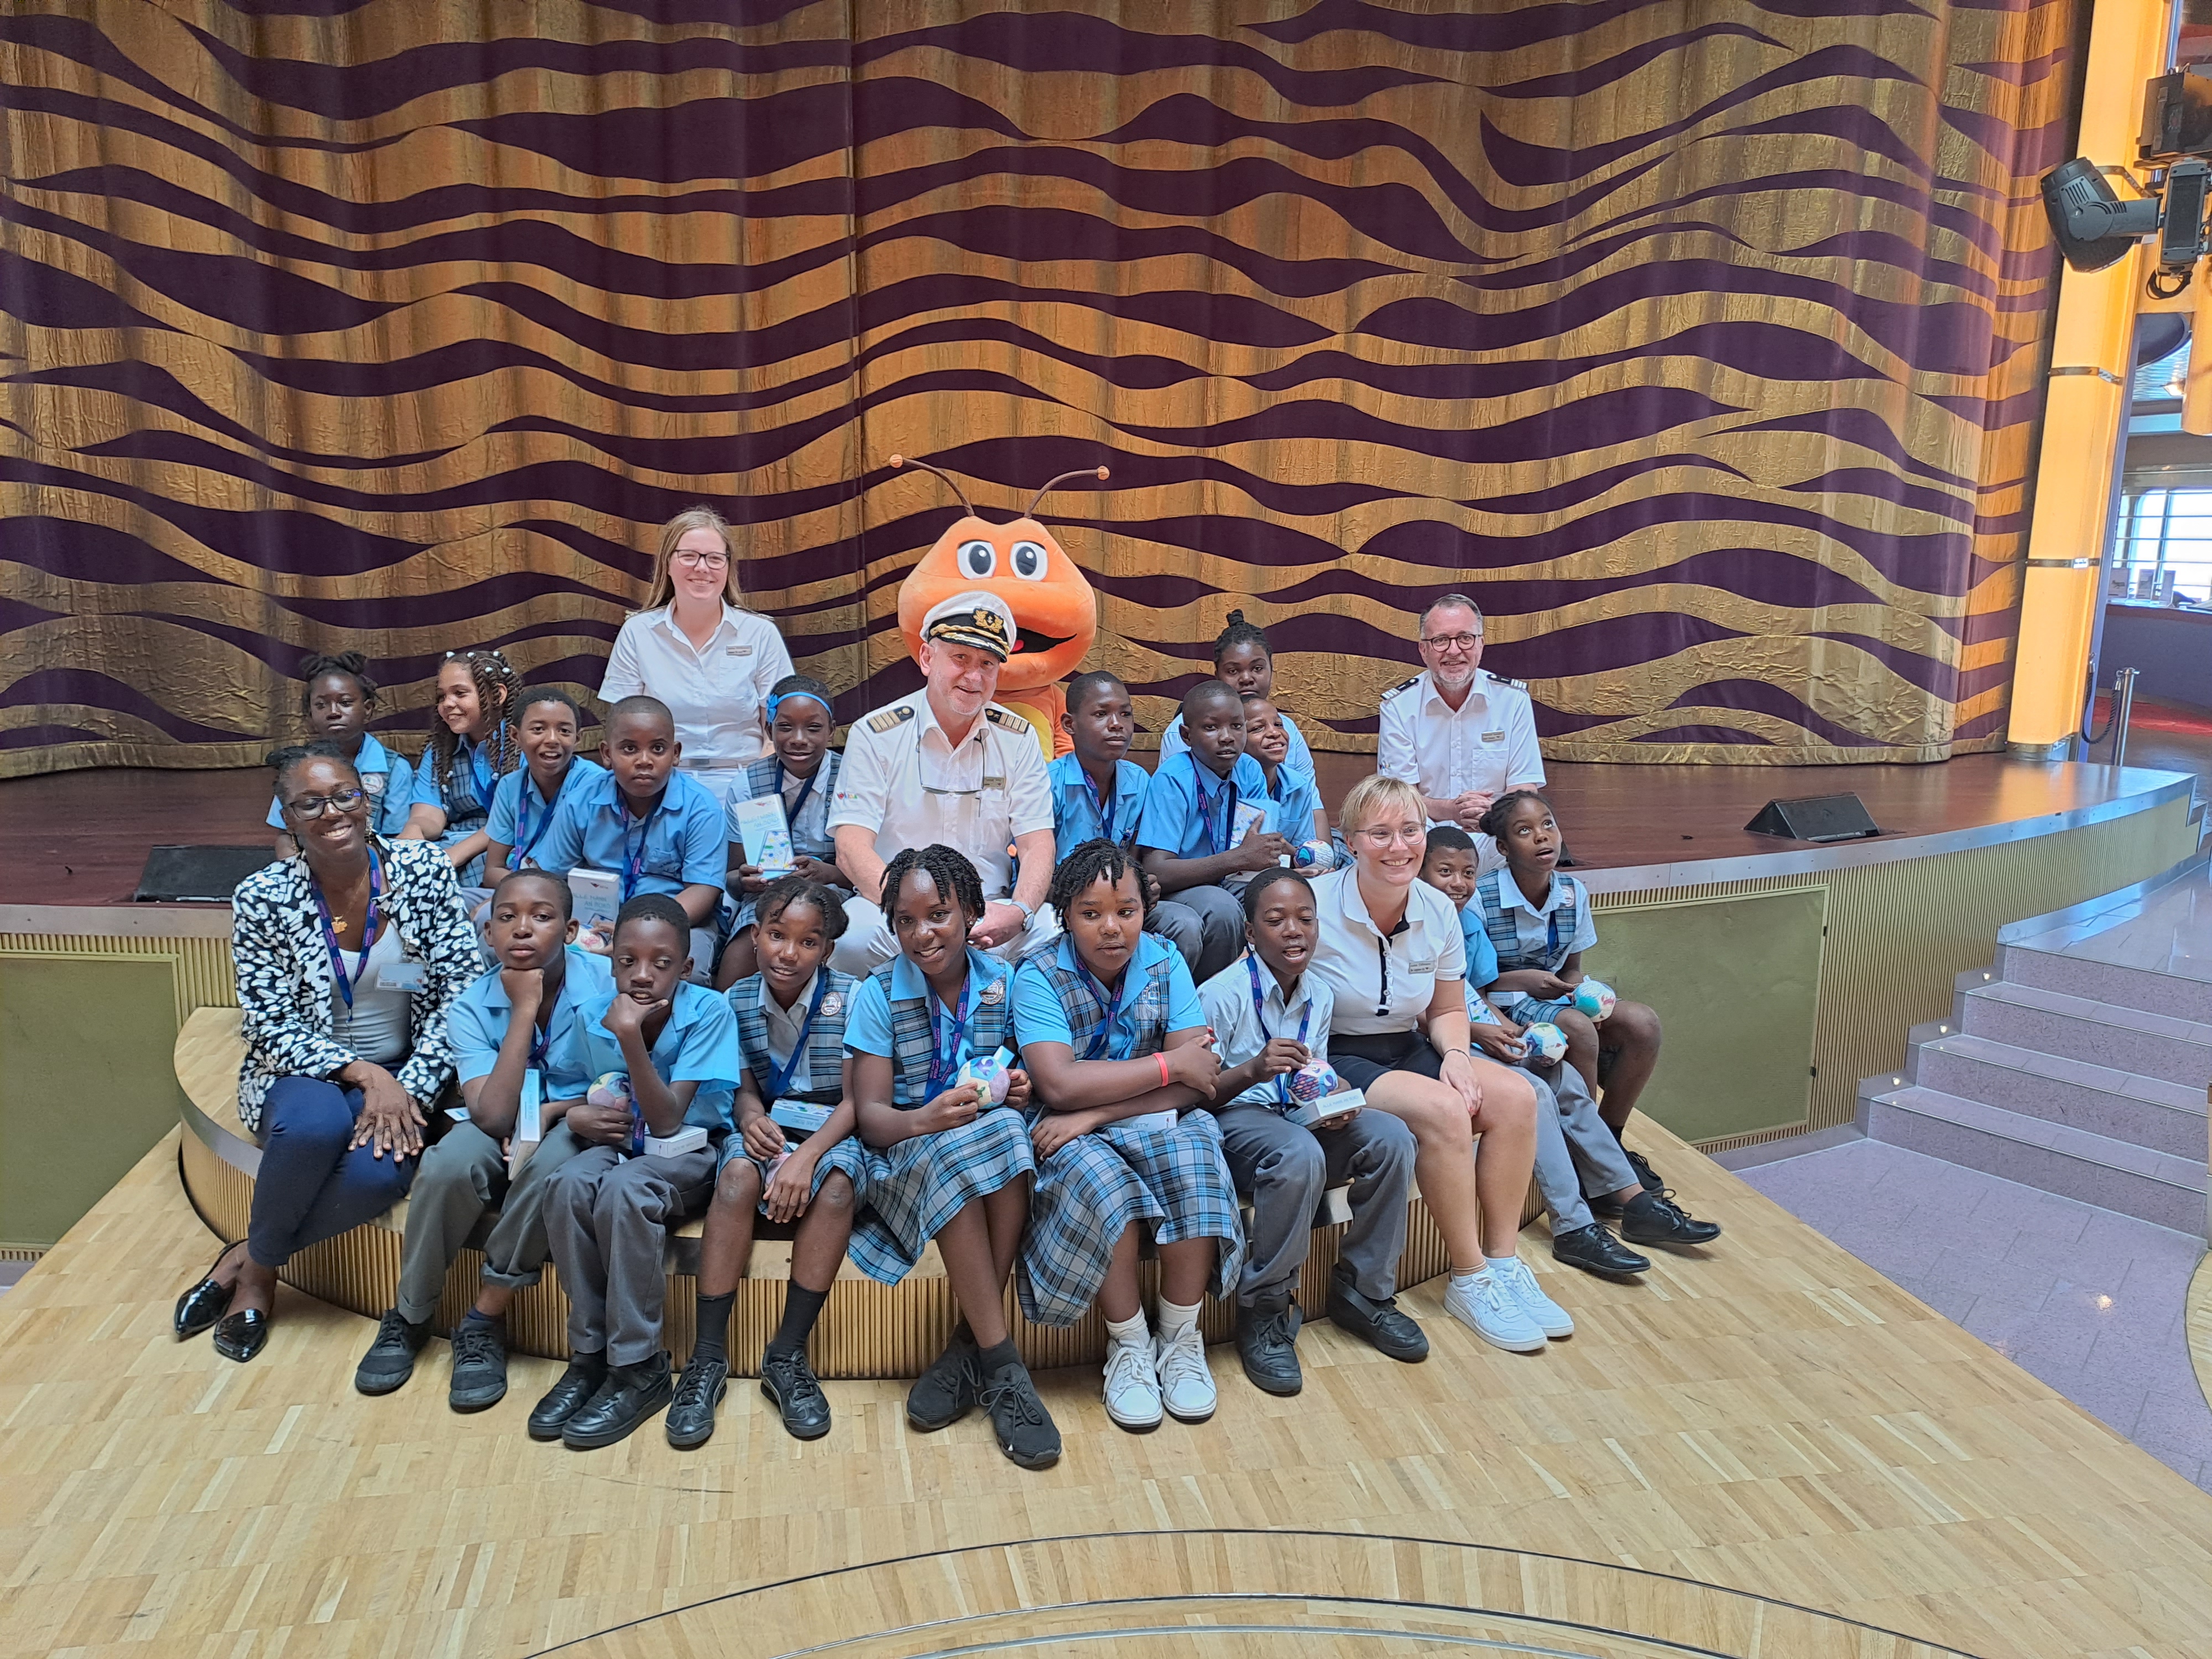 Antigua Cruise Port Partners with AIDA Cruises to Host a Memorable School Trip